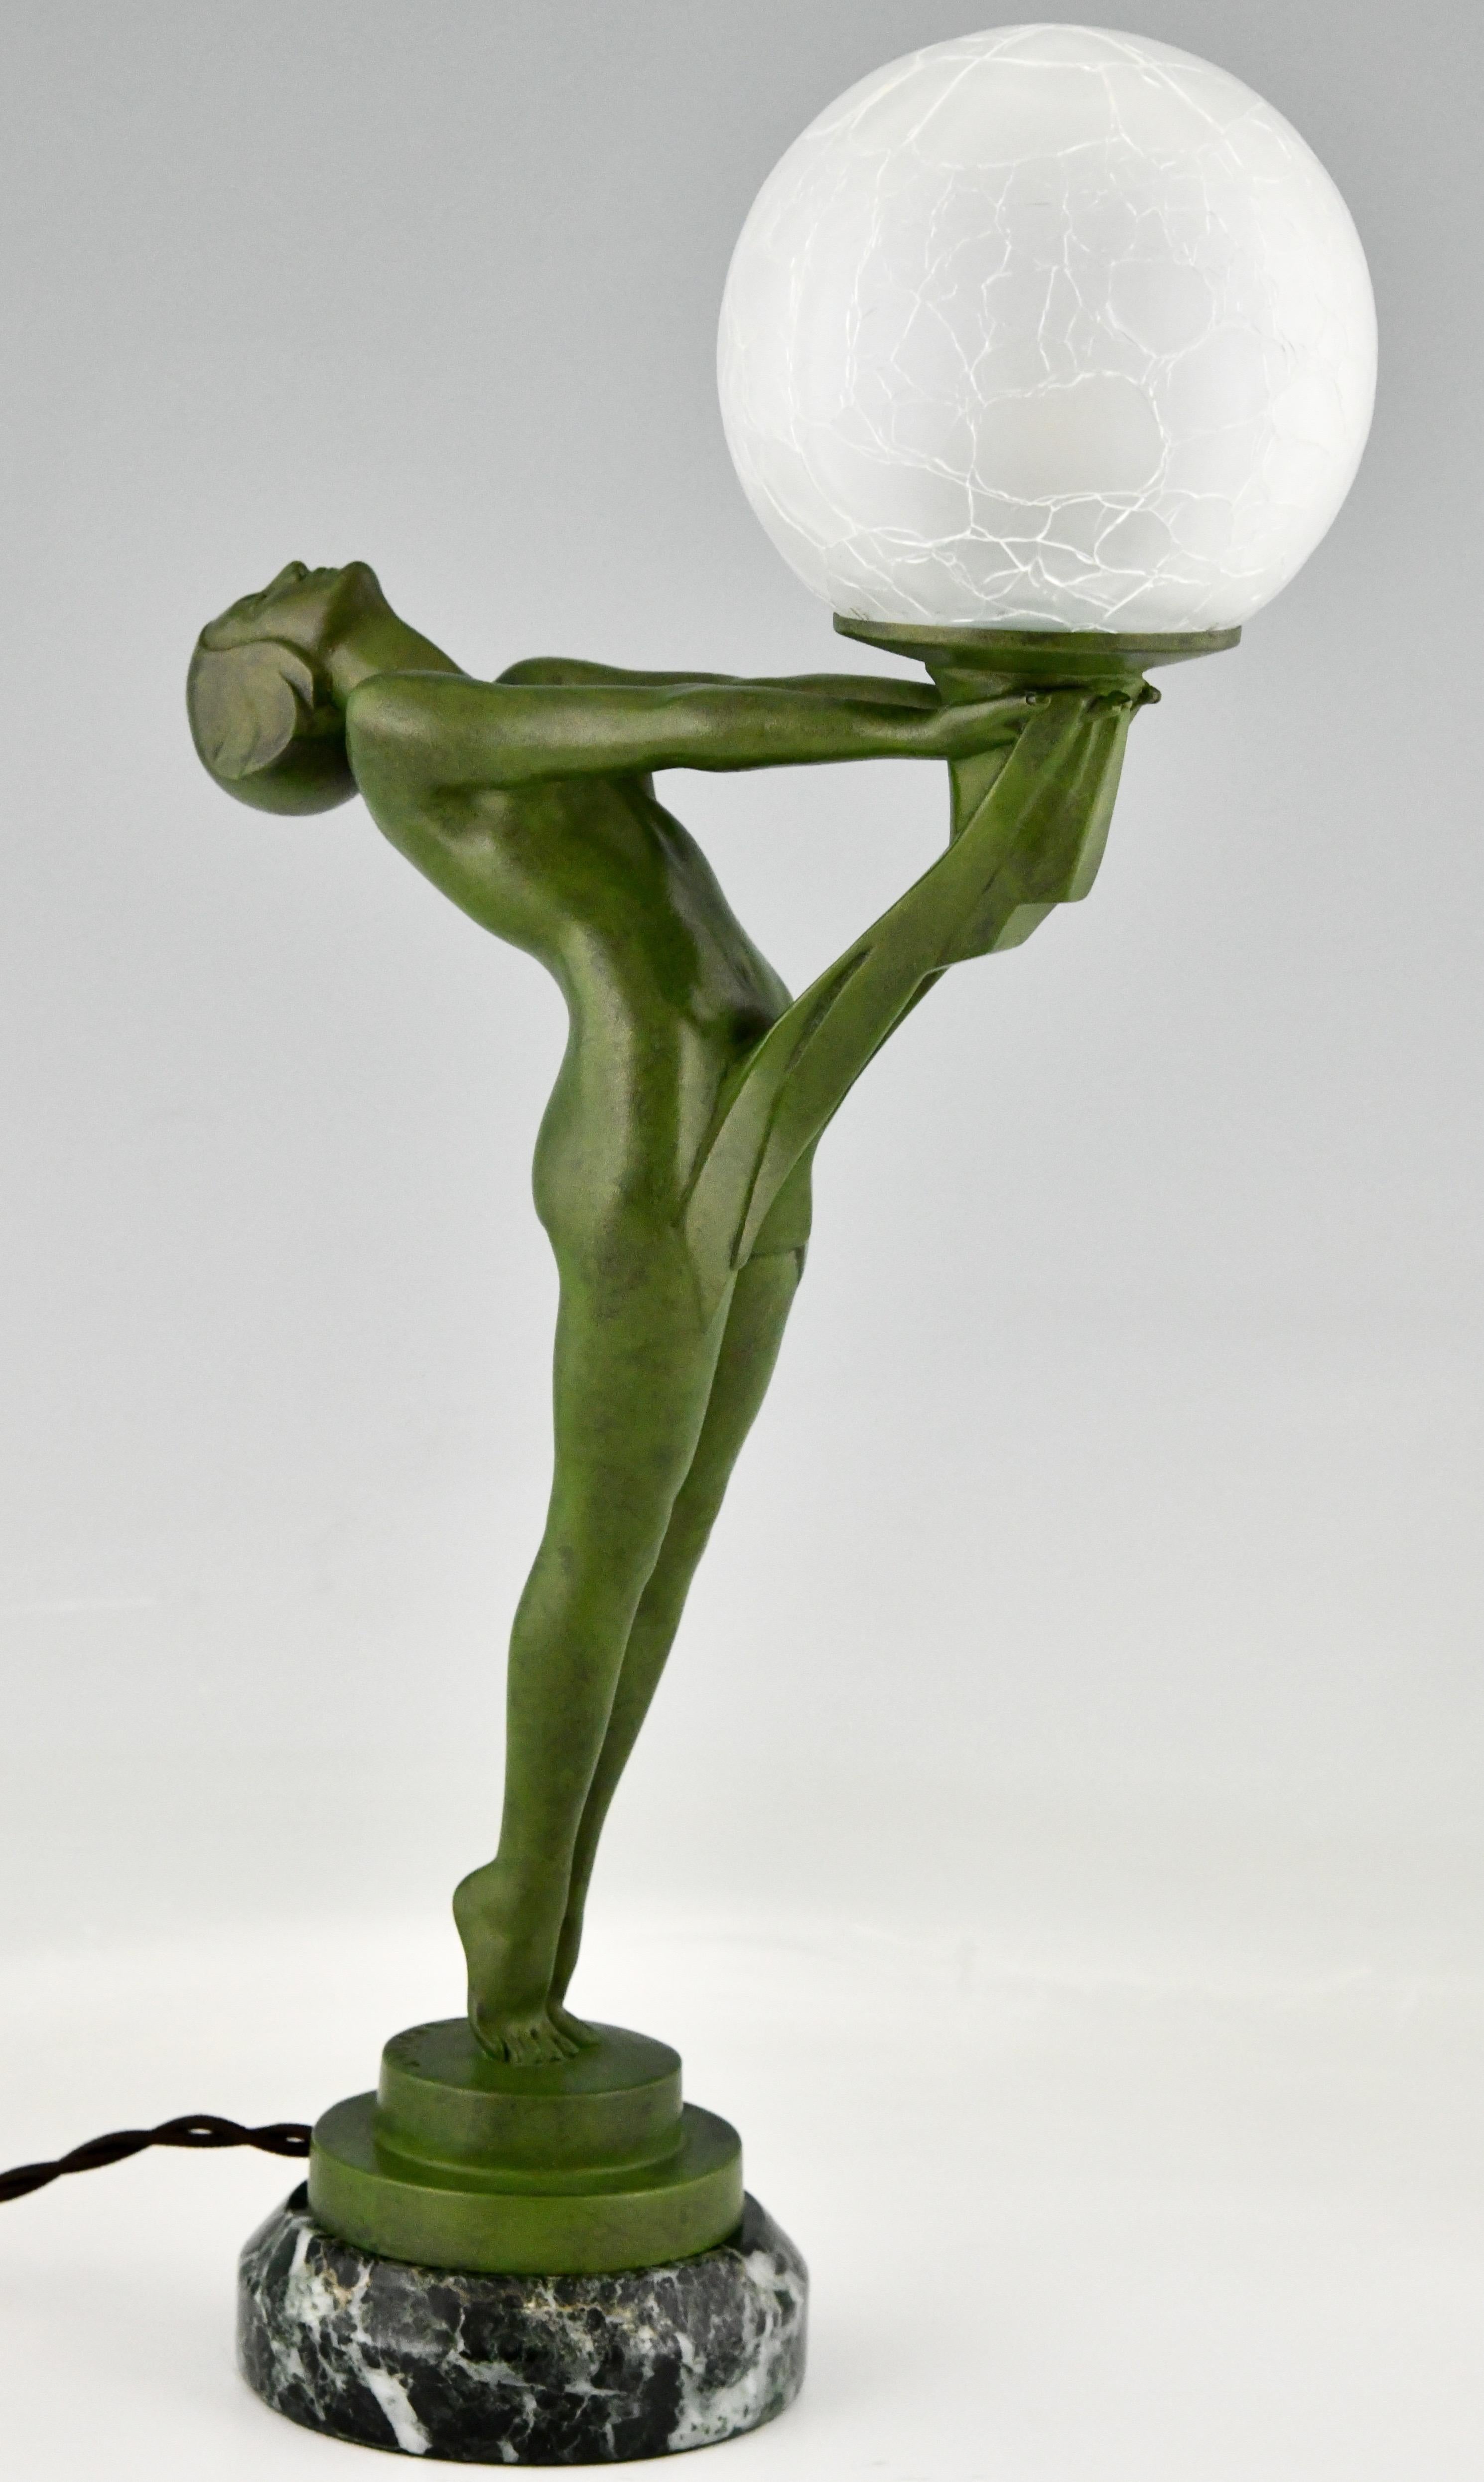 French Art Deco Lamp Standing Nude with Ball Clarté by Max Le Verrier Original 1930